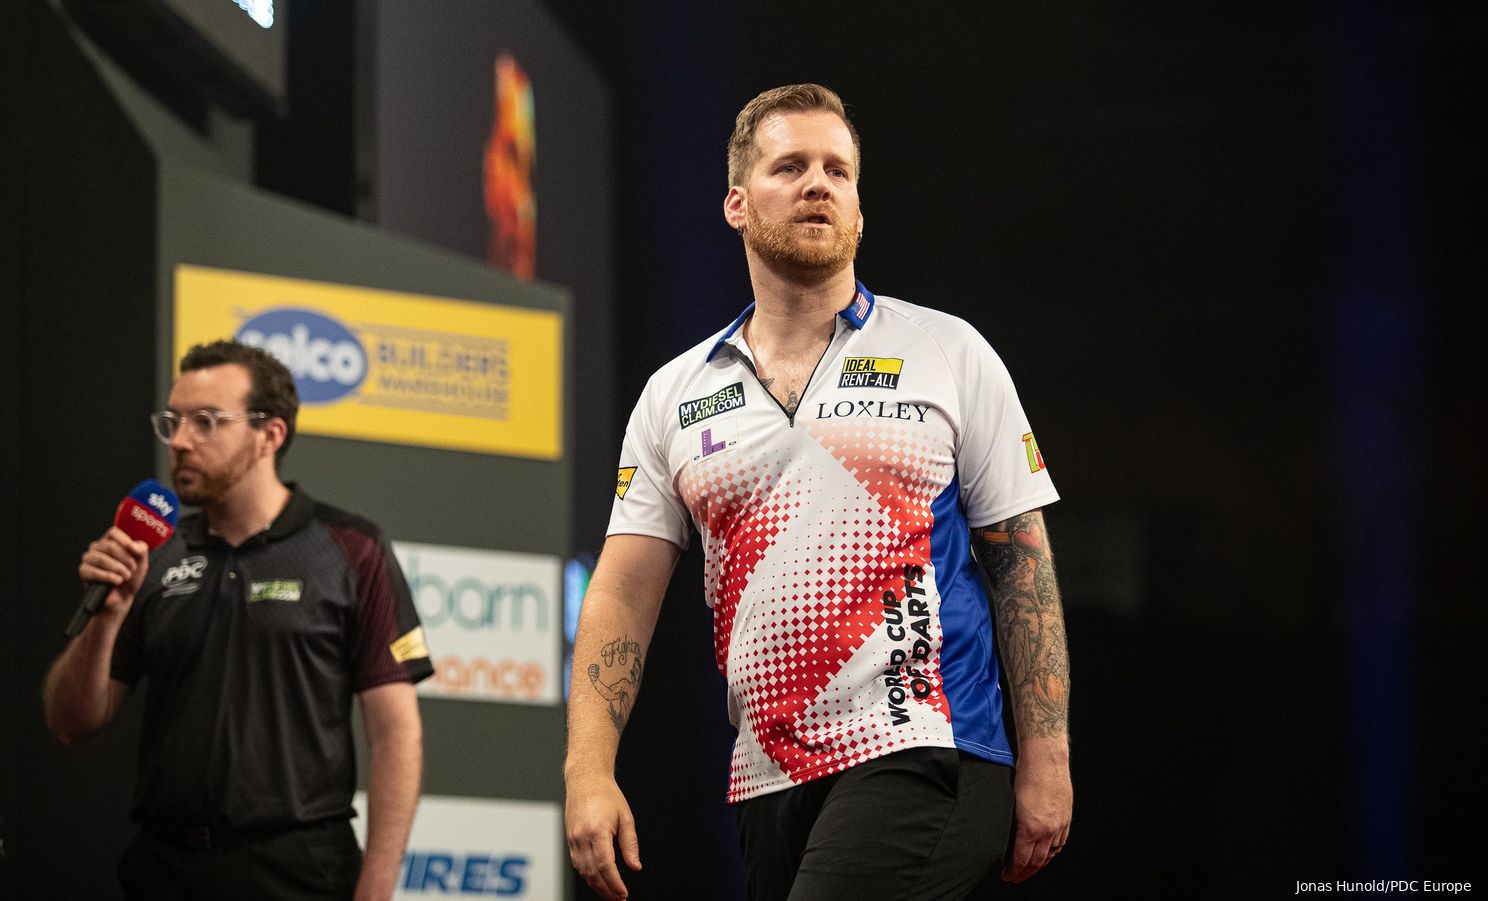 "Jules van Dongen received over 40 death threats" -  USA's World Cup of Darts star under fire from unhappy gamblers after group stage exit